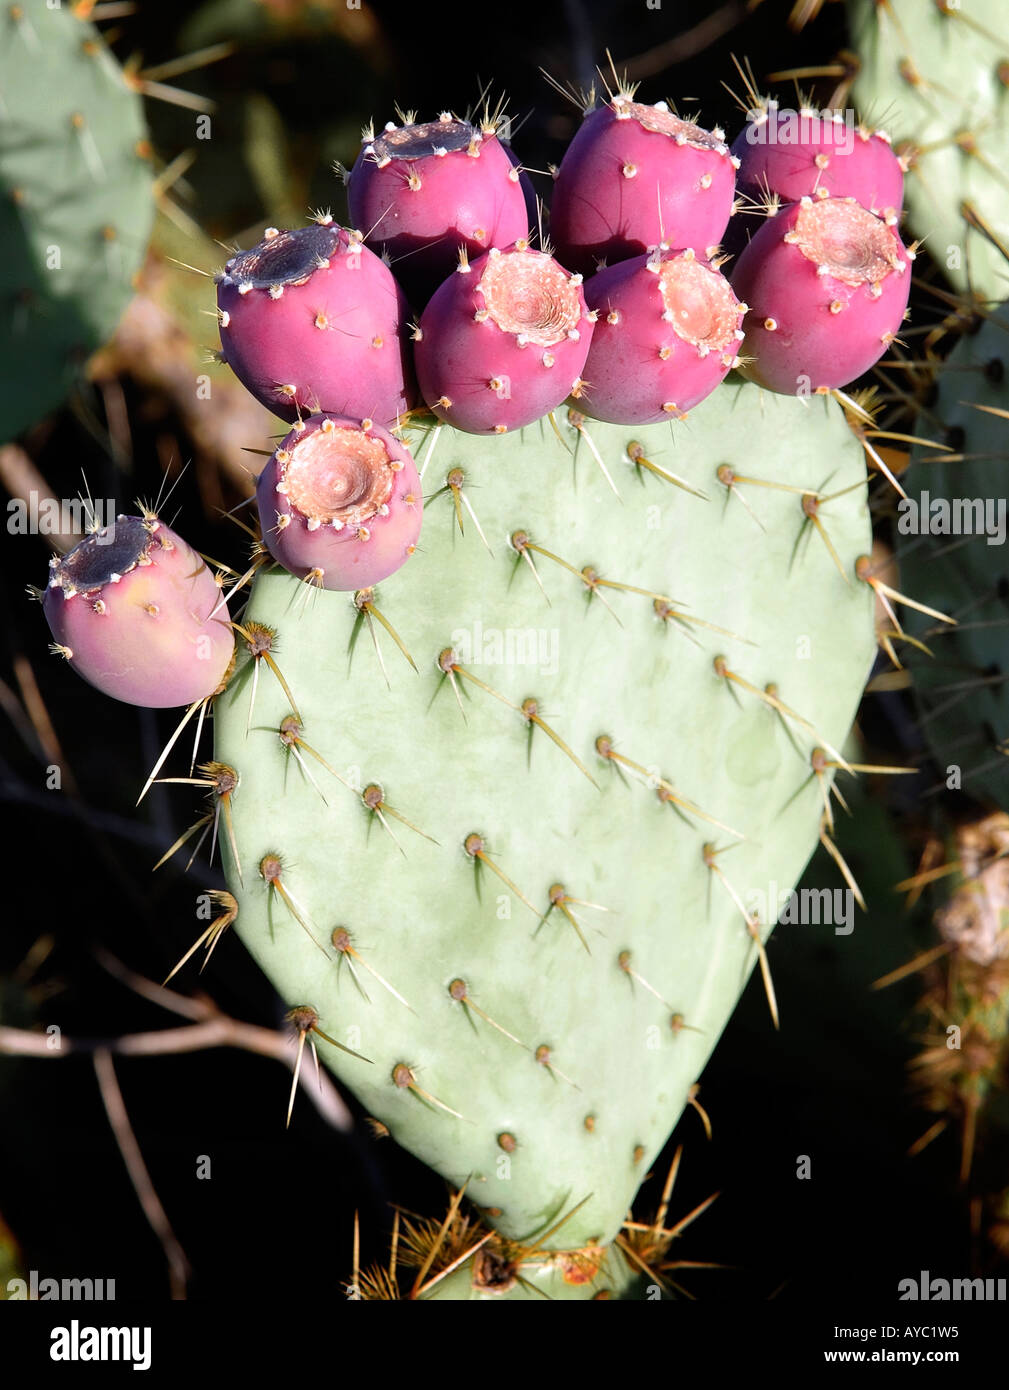 Cactus and prickly pear. Stock Photo